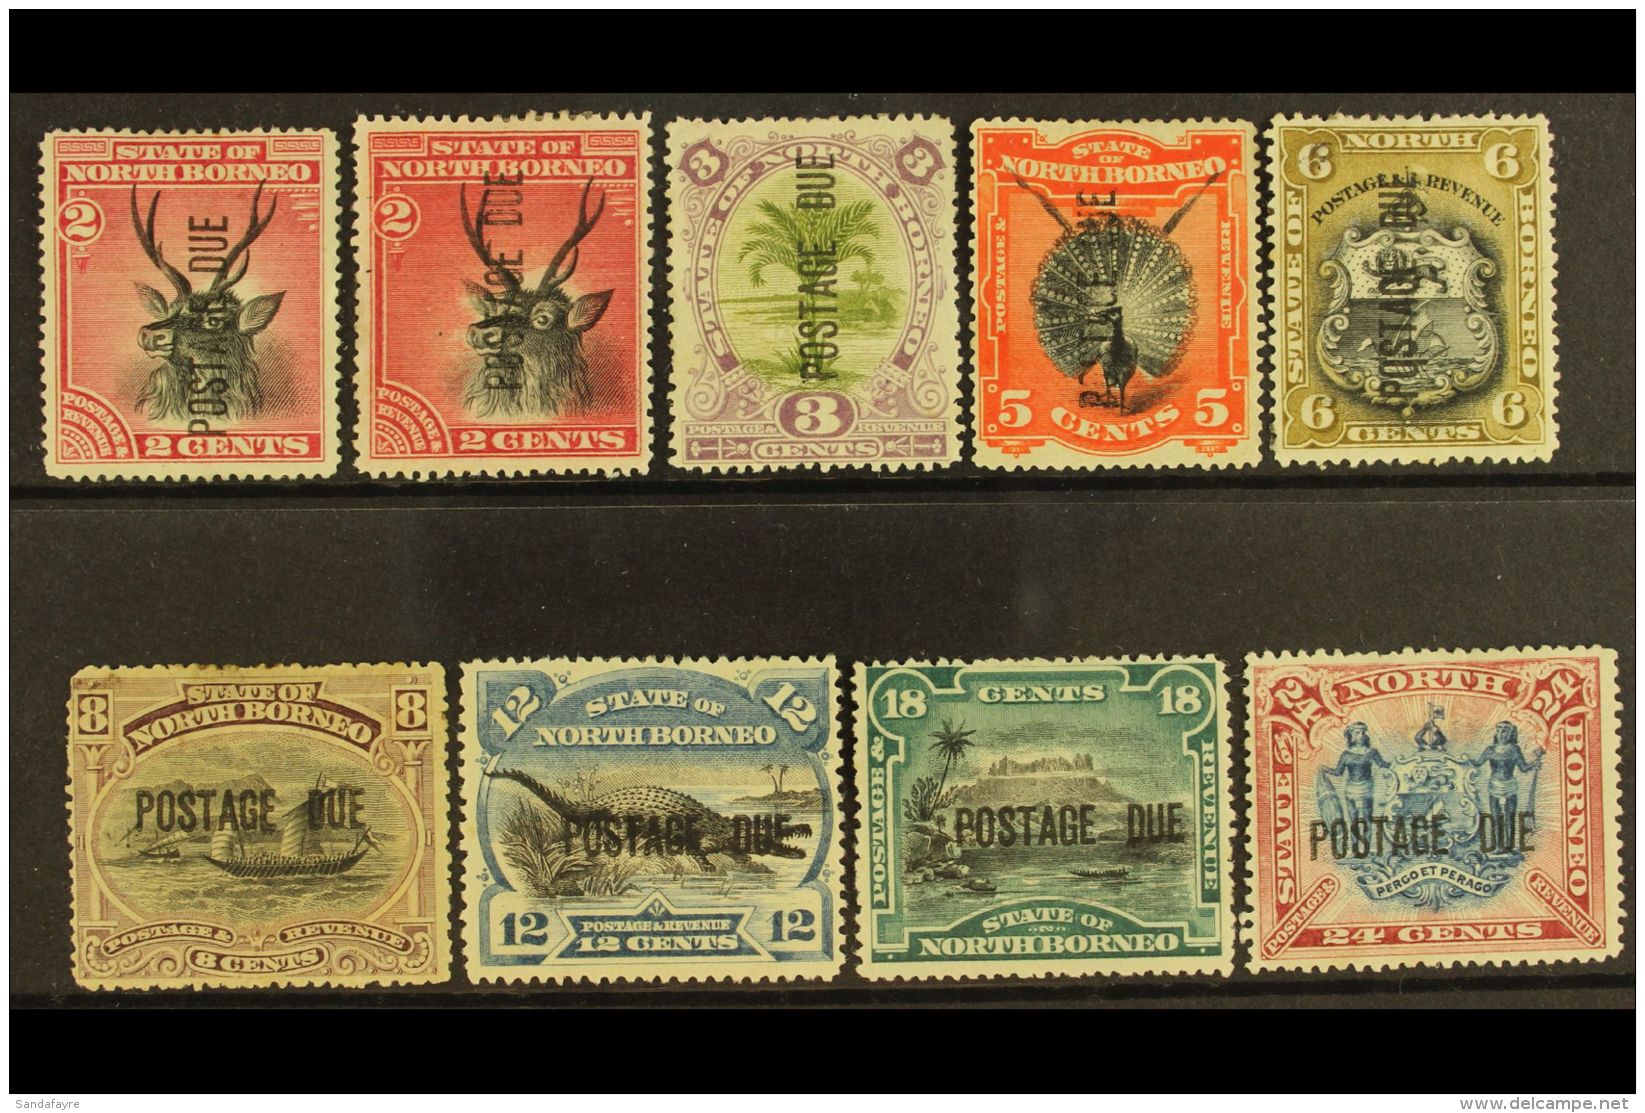 POSTAGE DUES 1895 Set Complete Incl 2c Black And Lake, SG D1/11, Very Fine And Fresh Mint (9 Stamps) For More... - North Borneo (...-1963)